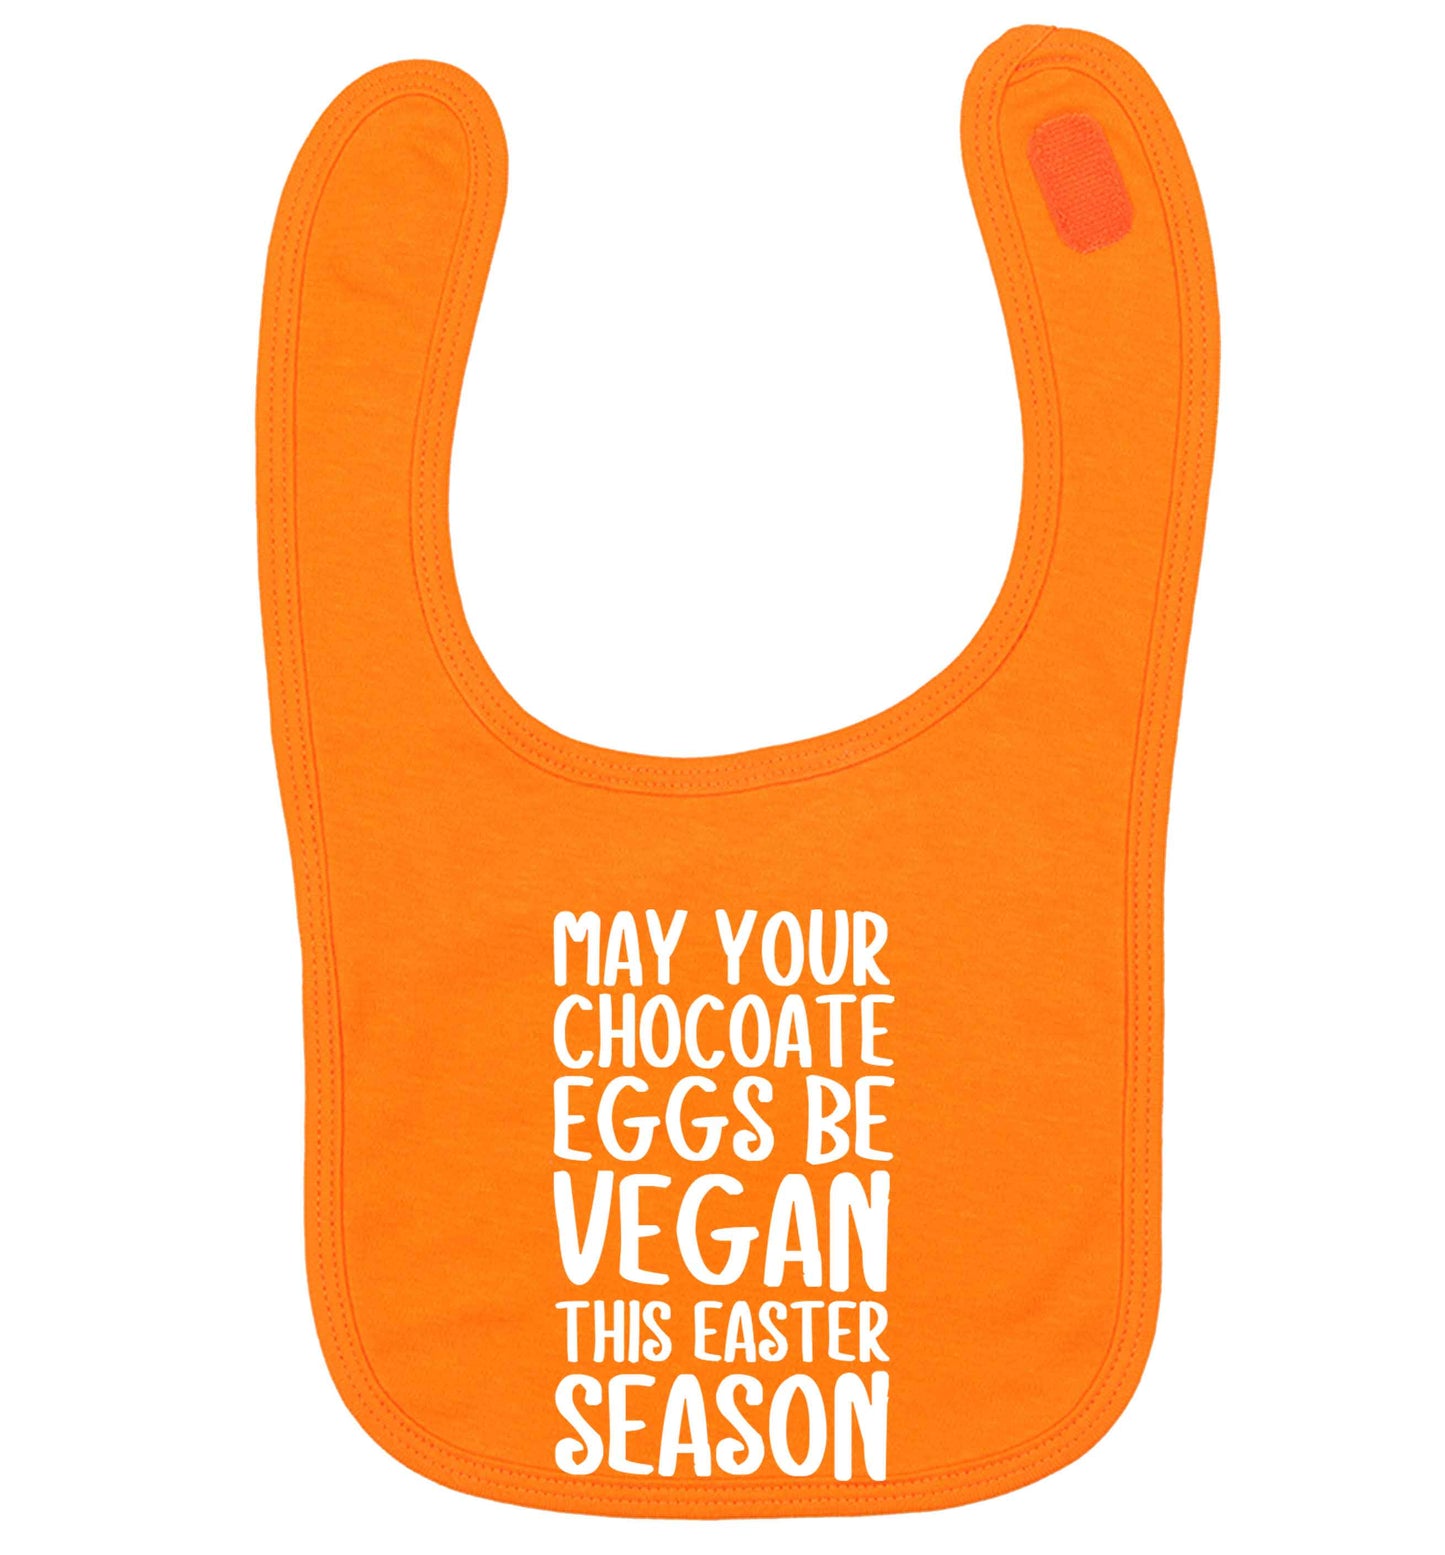 Easter bunny approved! Vegans will love this easter themed orange baby bib